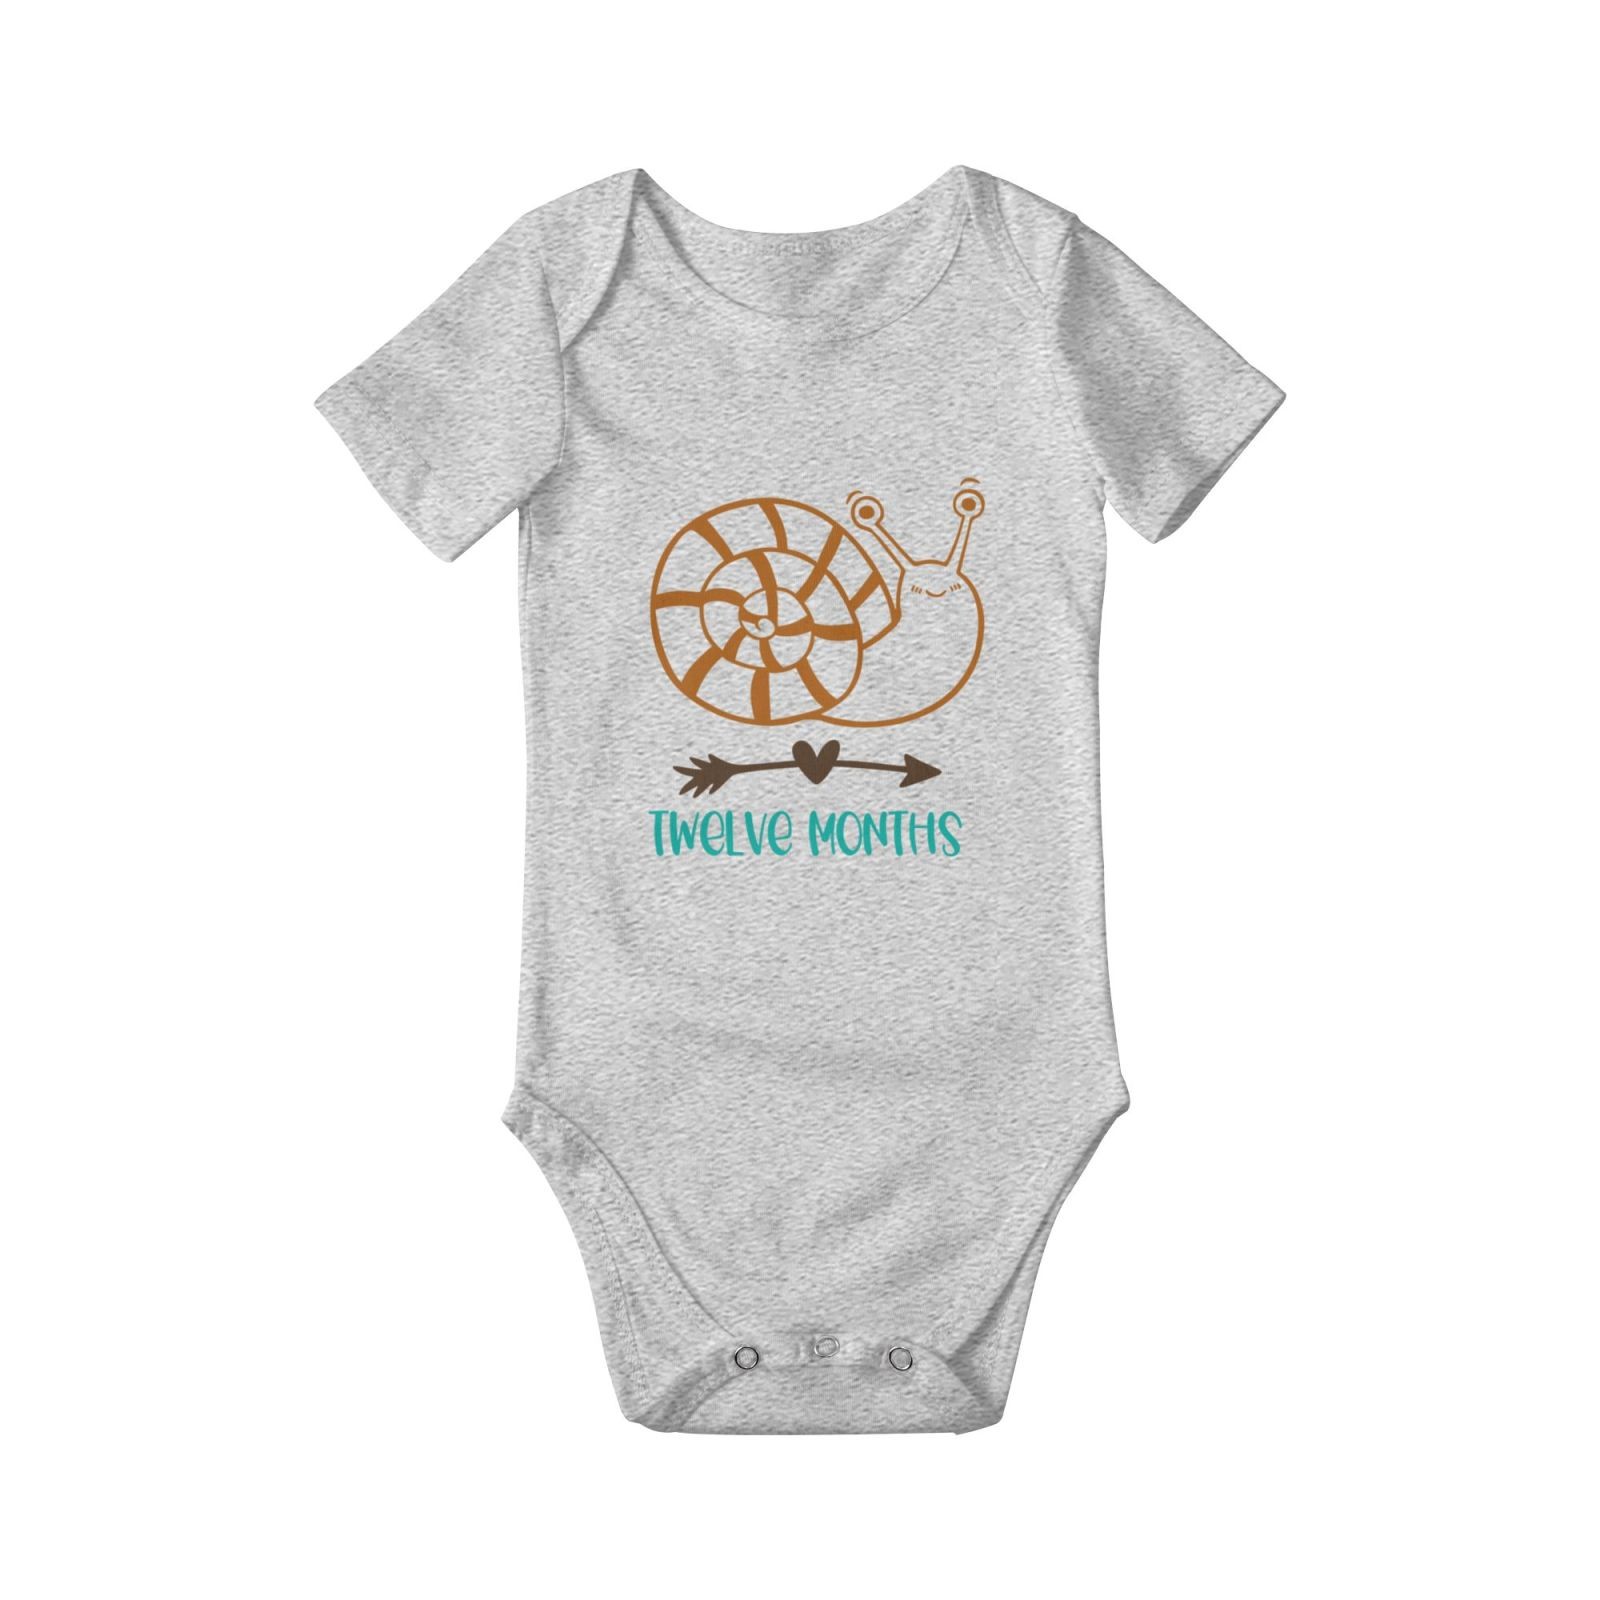 First Short Sleeve Baby Suit, Cotton Baby Suit, My 1st Mother's Day/Father's Day/Birthday Baby Suit, Gift for Babies